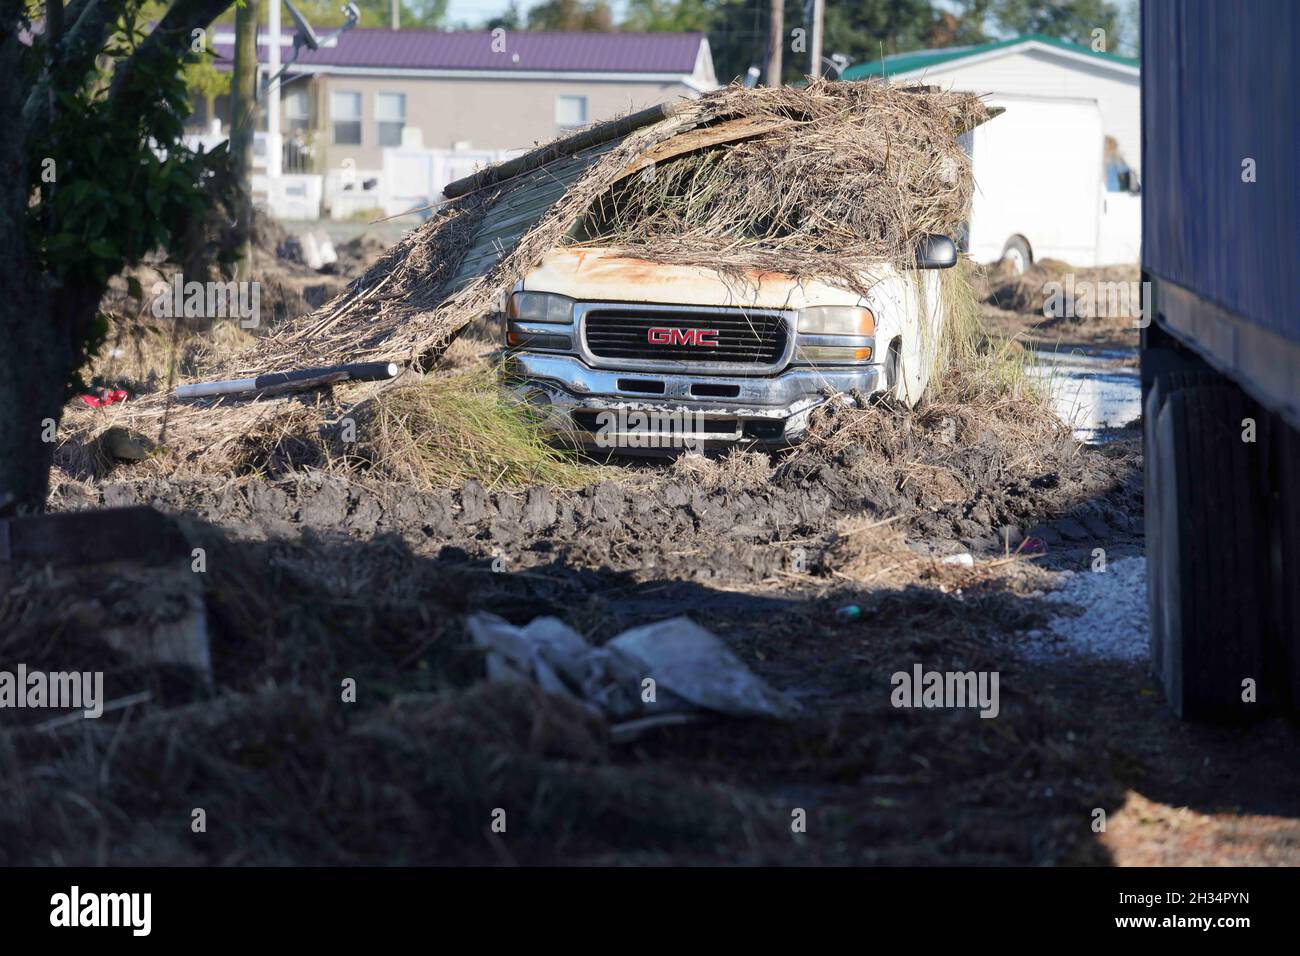 Ironton, United States of America. 24 September, 2021. Destroyed homes and property litter the area in the aftermath of Hurricane Ida September 24, 2021 in Ironton, Louisiana. Credit: Julie Joseph/FEMA/Alamy Live News Stock Photo